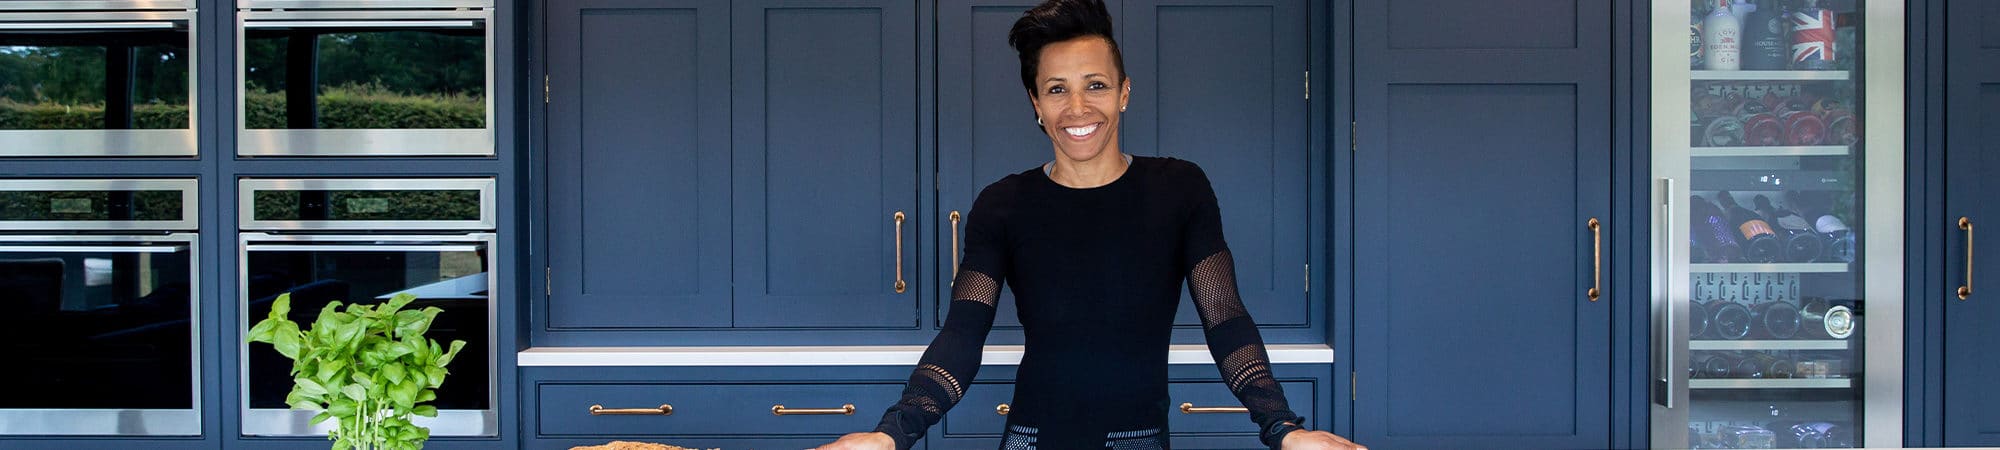 Kelly Holmes Kitchen Make-over Ovens and Wine Cabinet